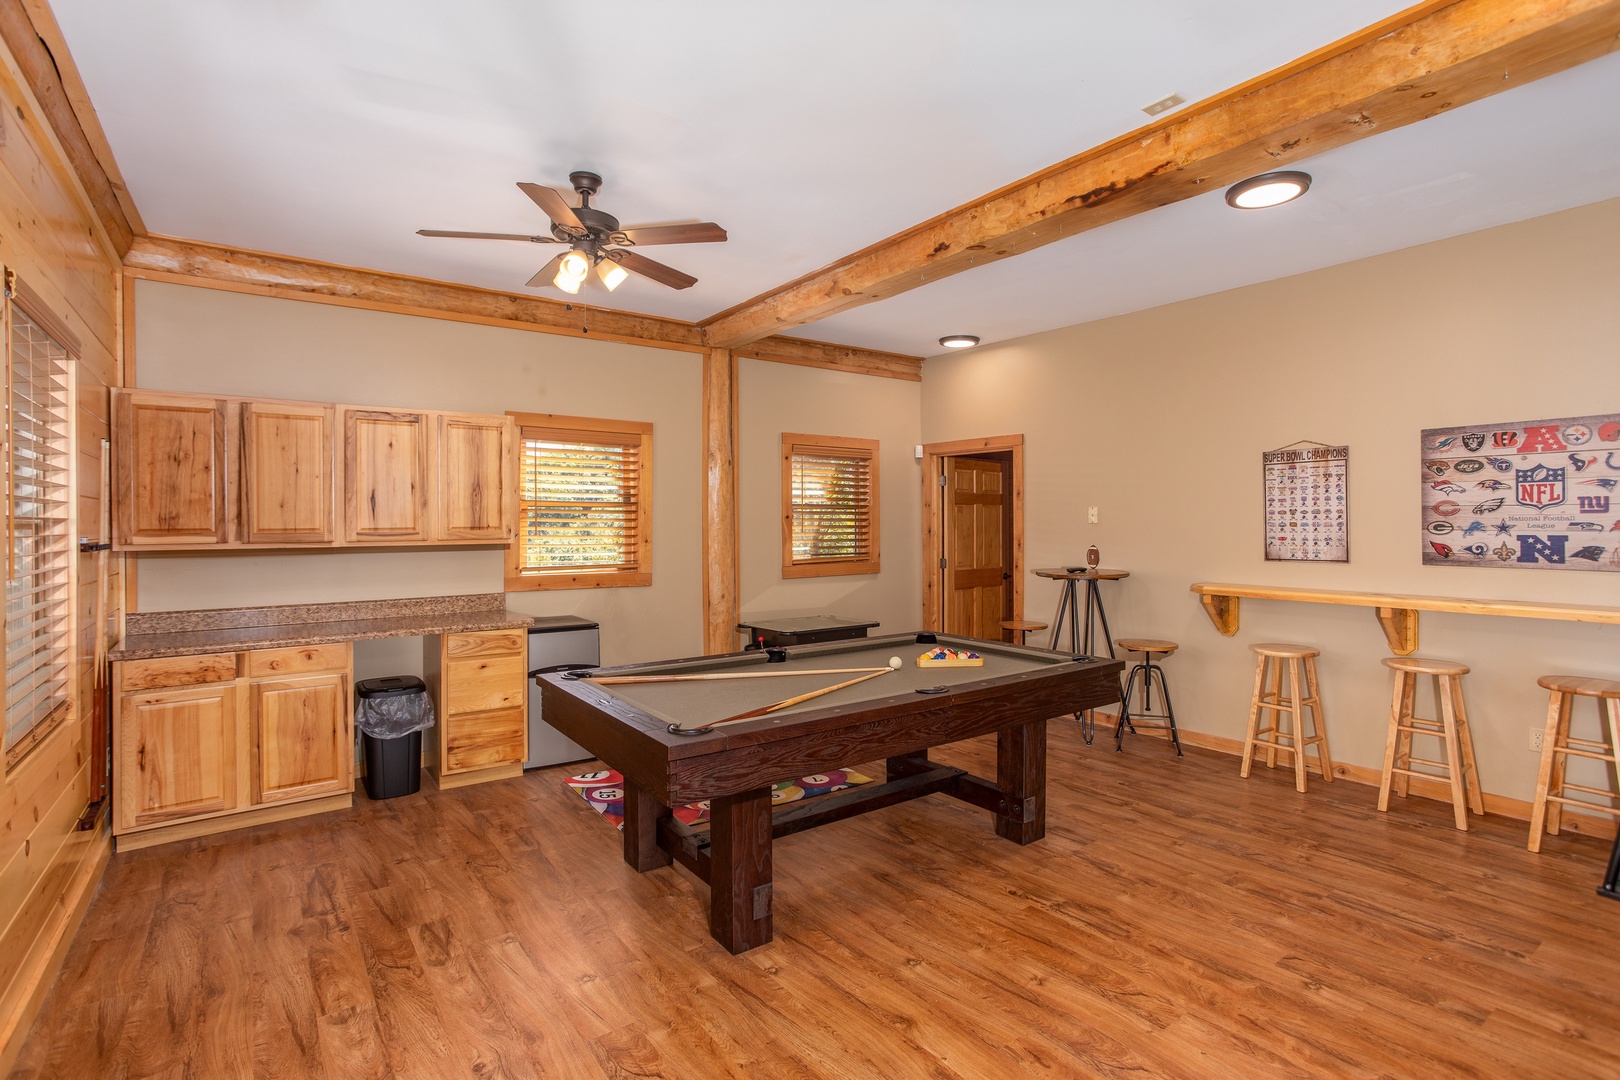 Pool table in the game room at Great View Lodge, a 5-bedroom cabin rental located in Pigeon Forge